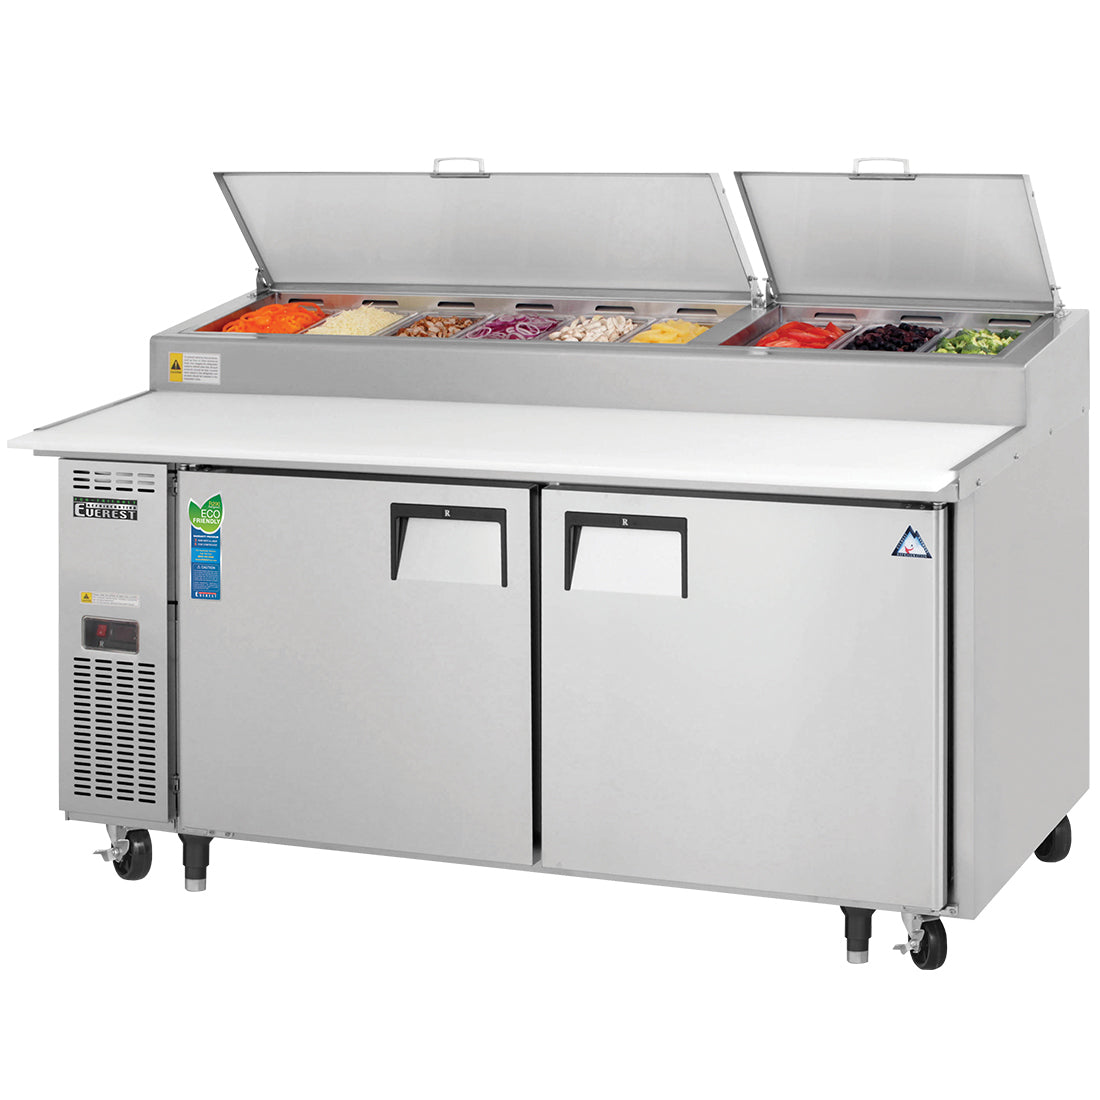 Everest EP Series-EPPR2 Two Section Side Mount Pizza Prep Table - 23 Cu. Ft.